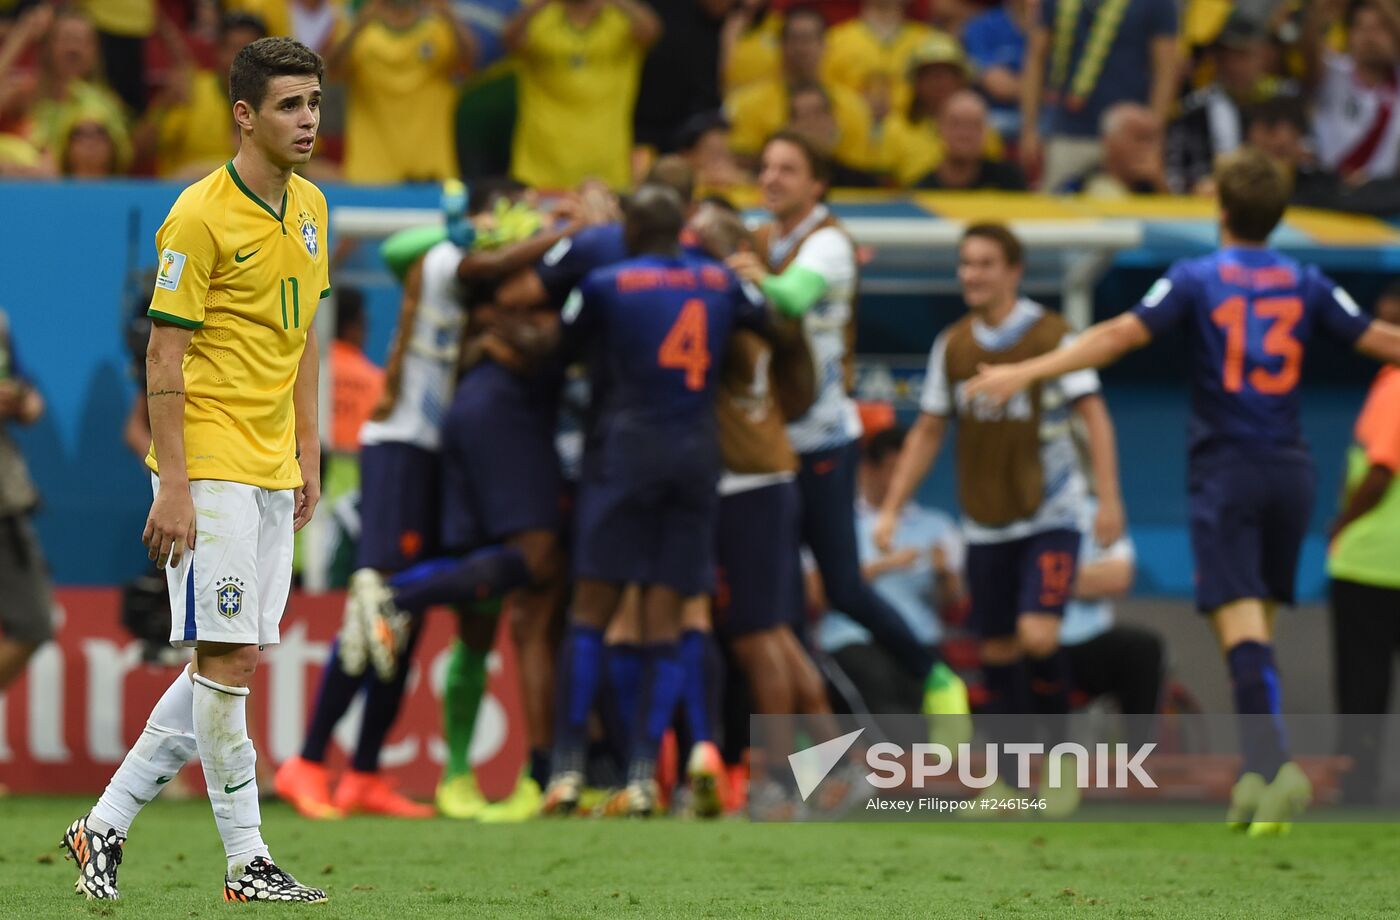 2014 FIFA World Cup third place play-off. Brazil vs. Netherlands